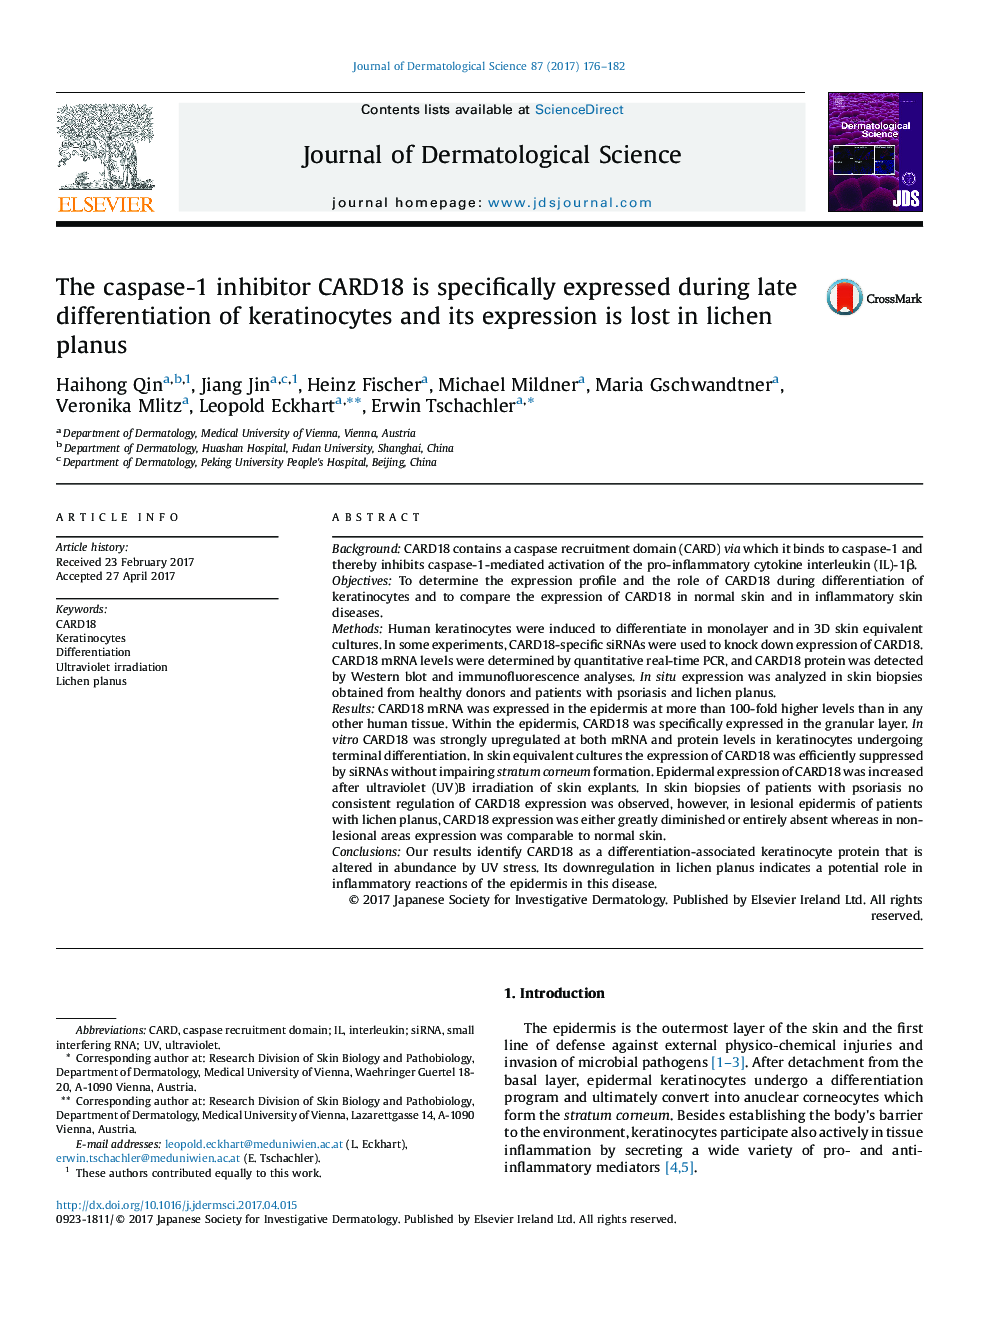 The caspase-1 inhibitor CARD18 is specifically expressed during late differentiation of keratinocytes and its expression is lost in lichen planus